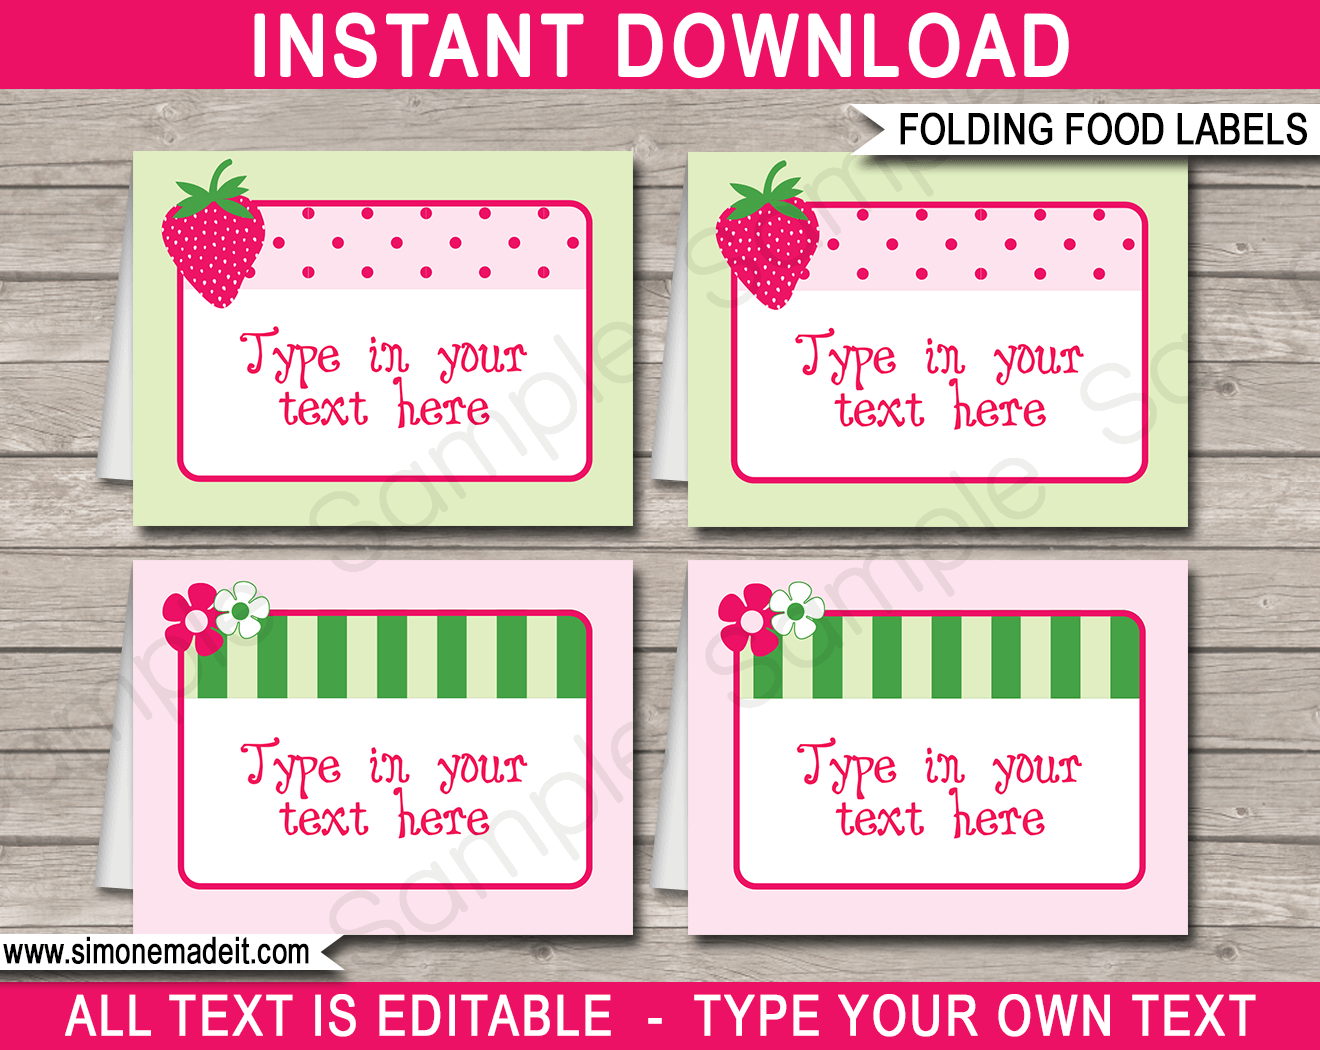 Printable Strawberry Shortcake Party Food Labels | Food Buffet Tags | Place Cards | Birthday Party | Editable DIY Template | $3.00 INSTANT DOWNLOAD via SIMONEmadeit.com